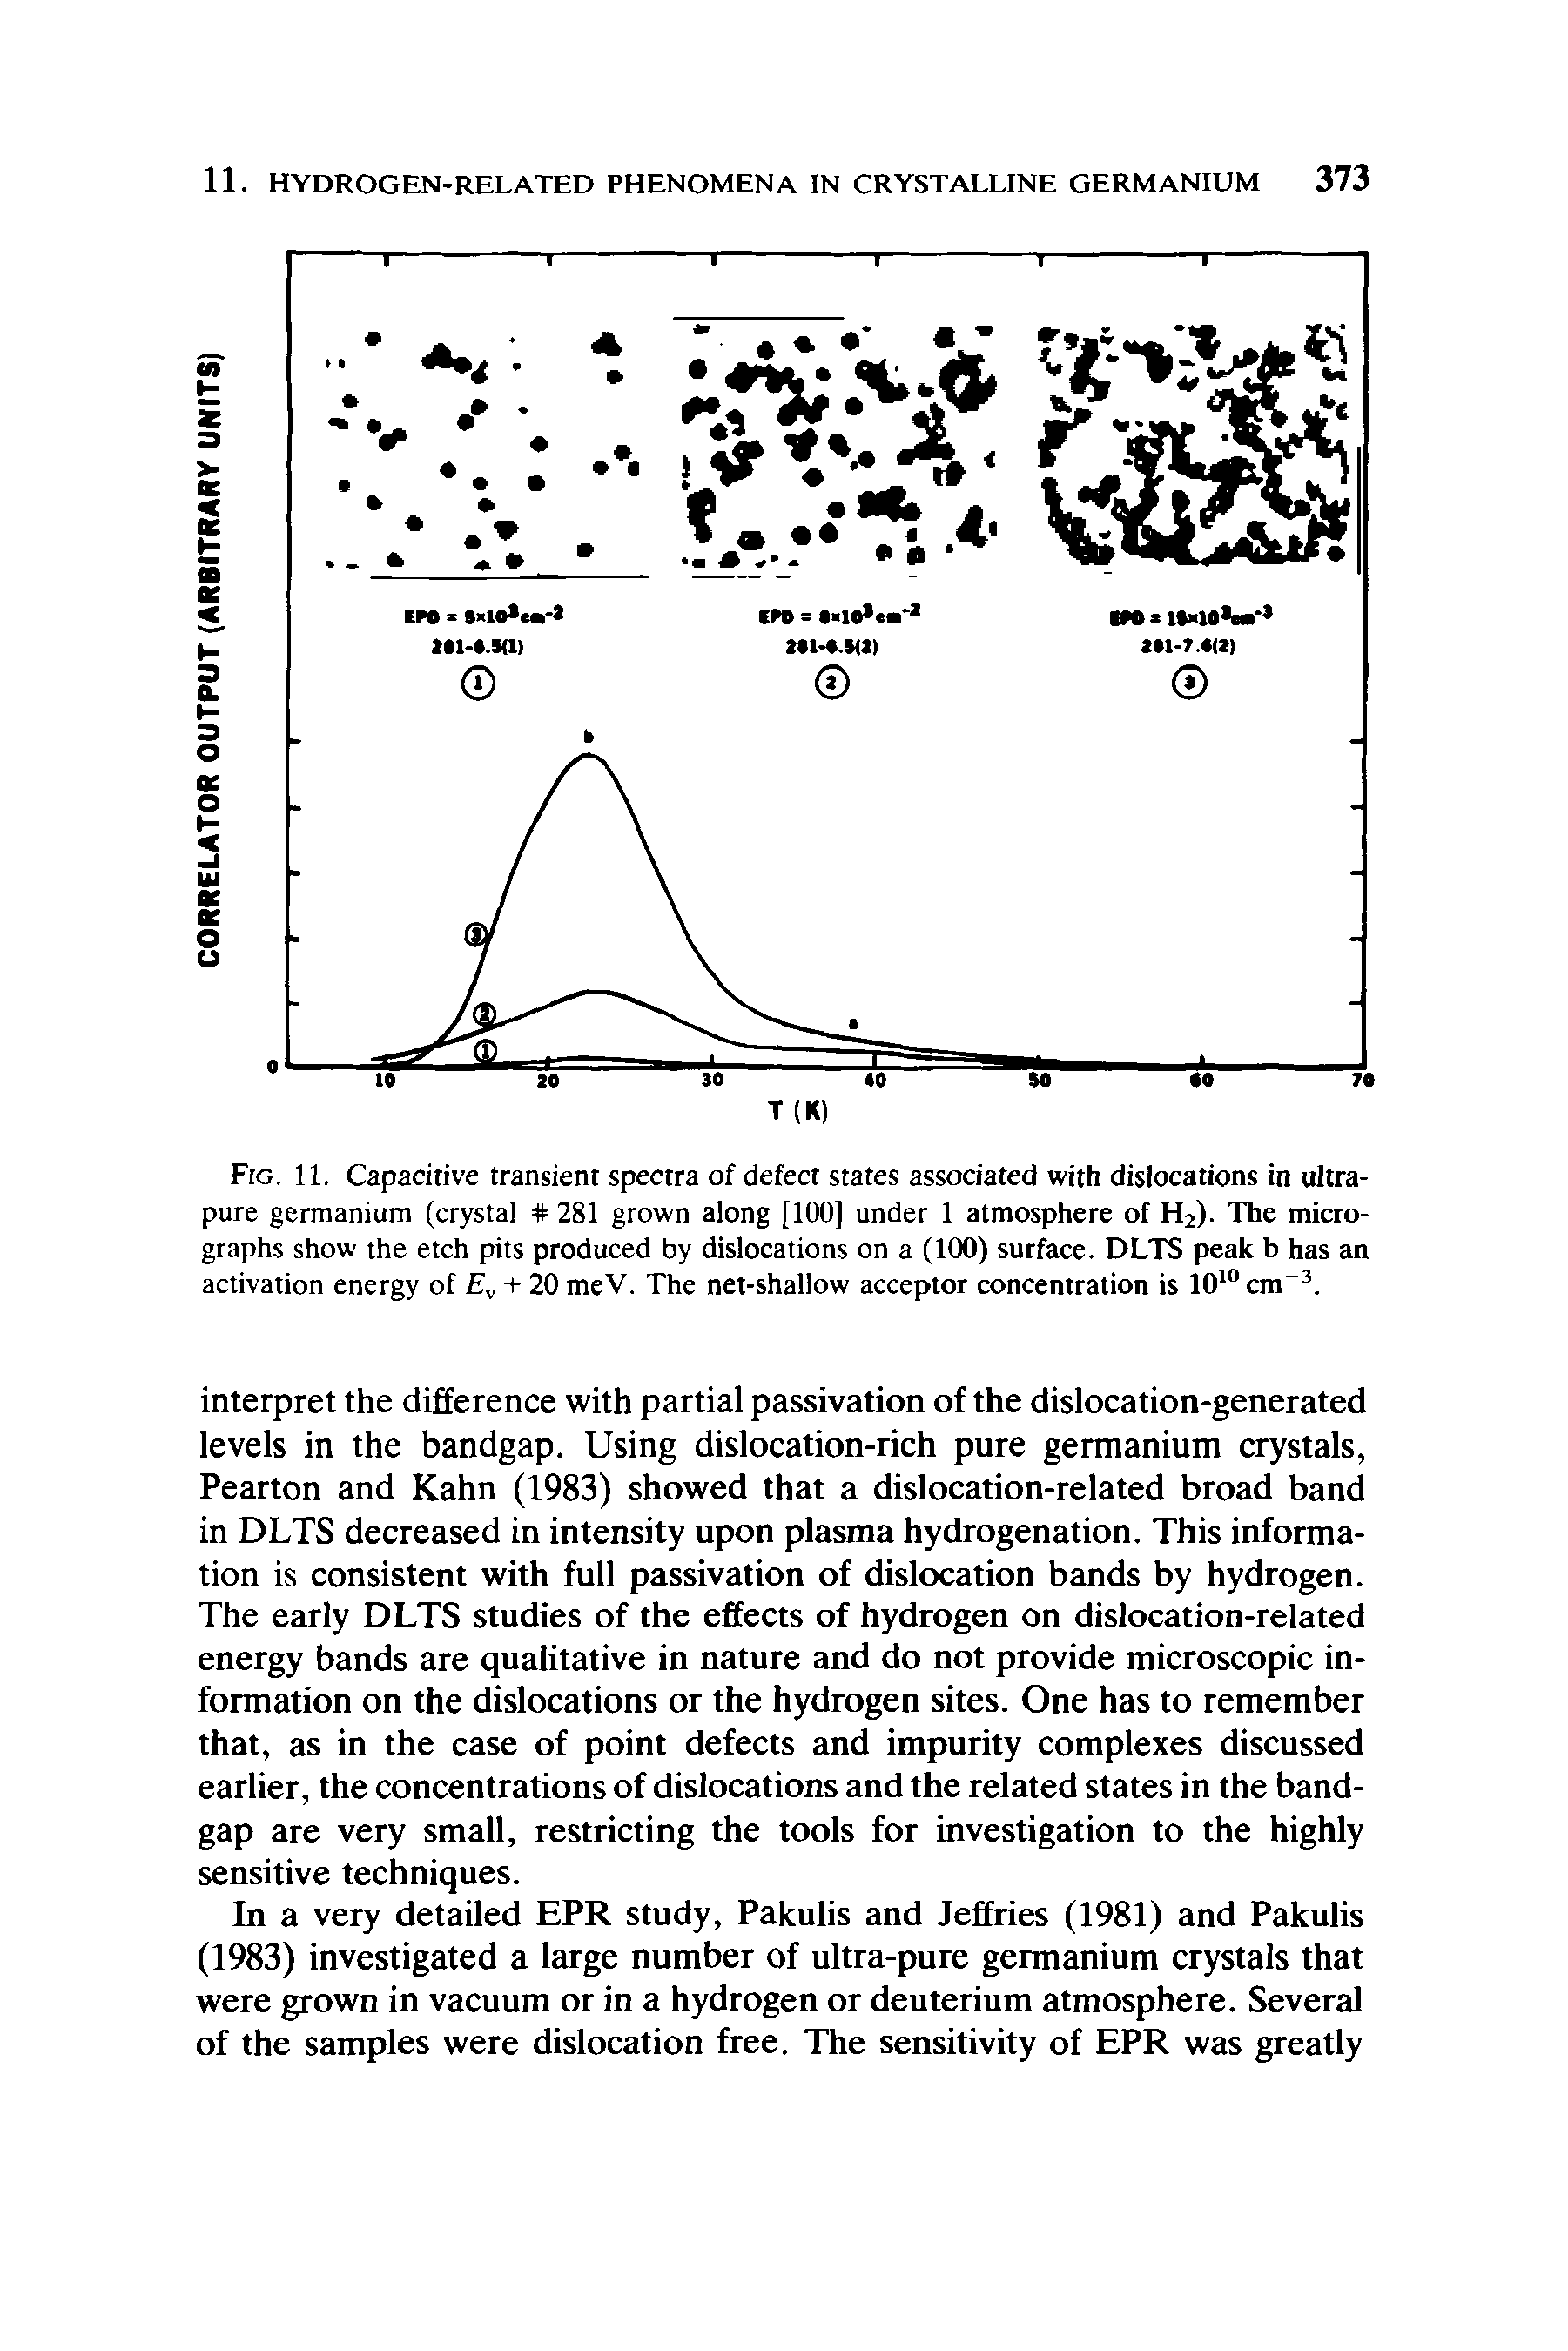 Fig. 11. Capacitive transient spectra of defect states associated with dislocations in ultra-pure germanium (crystal 281 grown along [100] under 1 atmosphere of H2) The micrographs show the etch pits produced by dislocations on a (100) surface. DLTS peak b has an activation energy of Ev + 20 meV. The net-shallow acceptor concentration is 1010 cm-3.